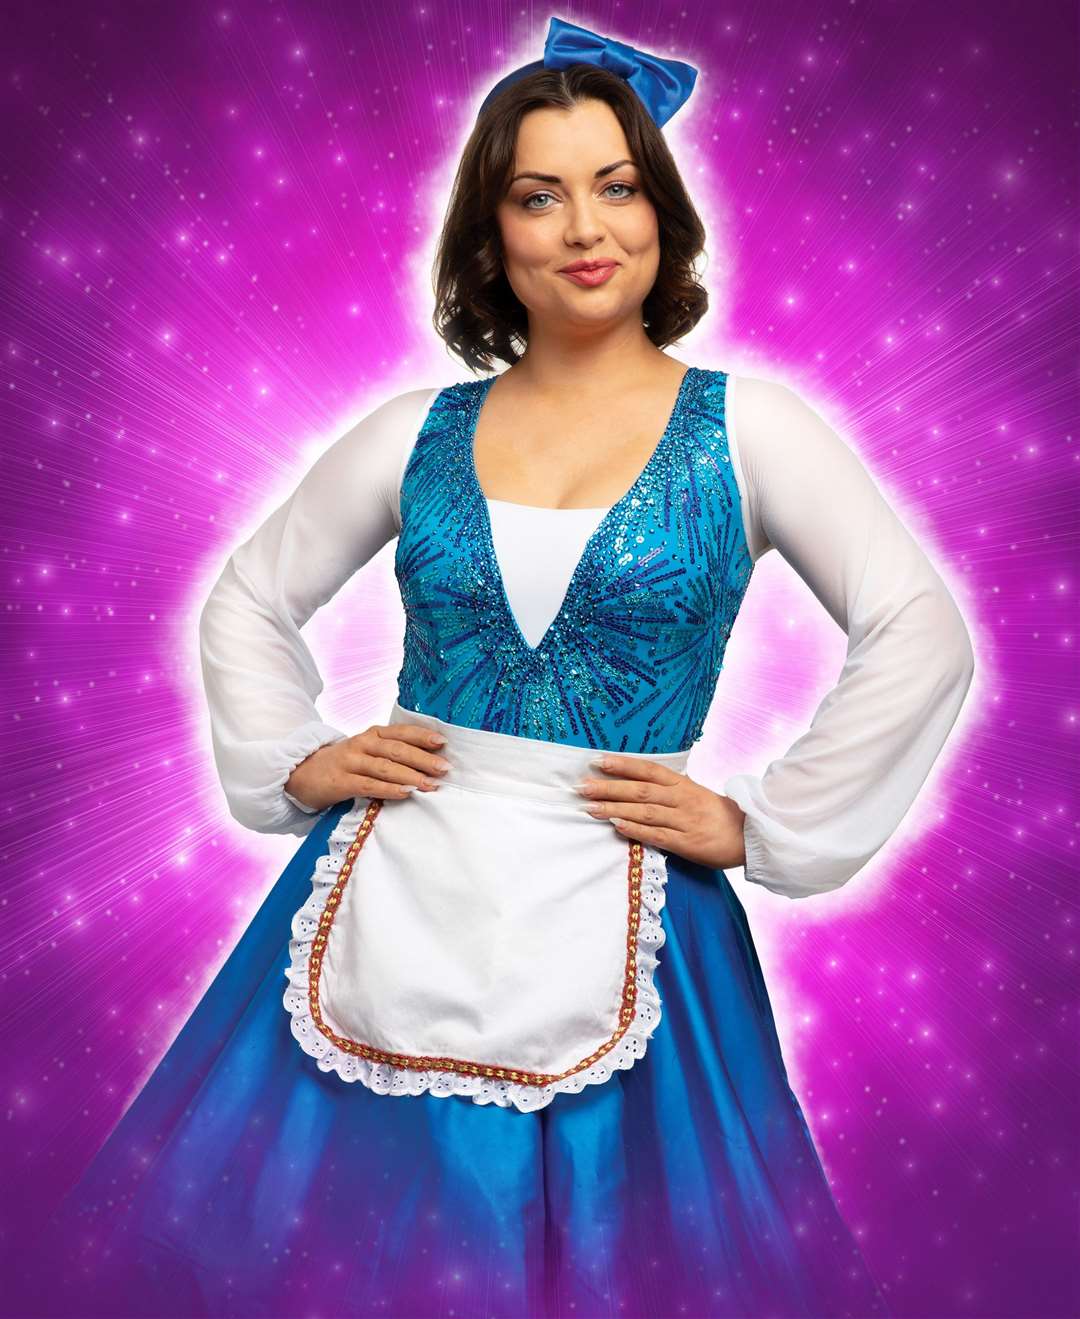 Shona McGarty as Belle. Photo credit: Sparkled Press